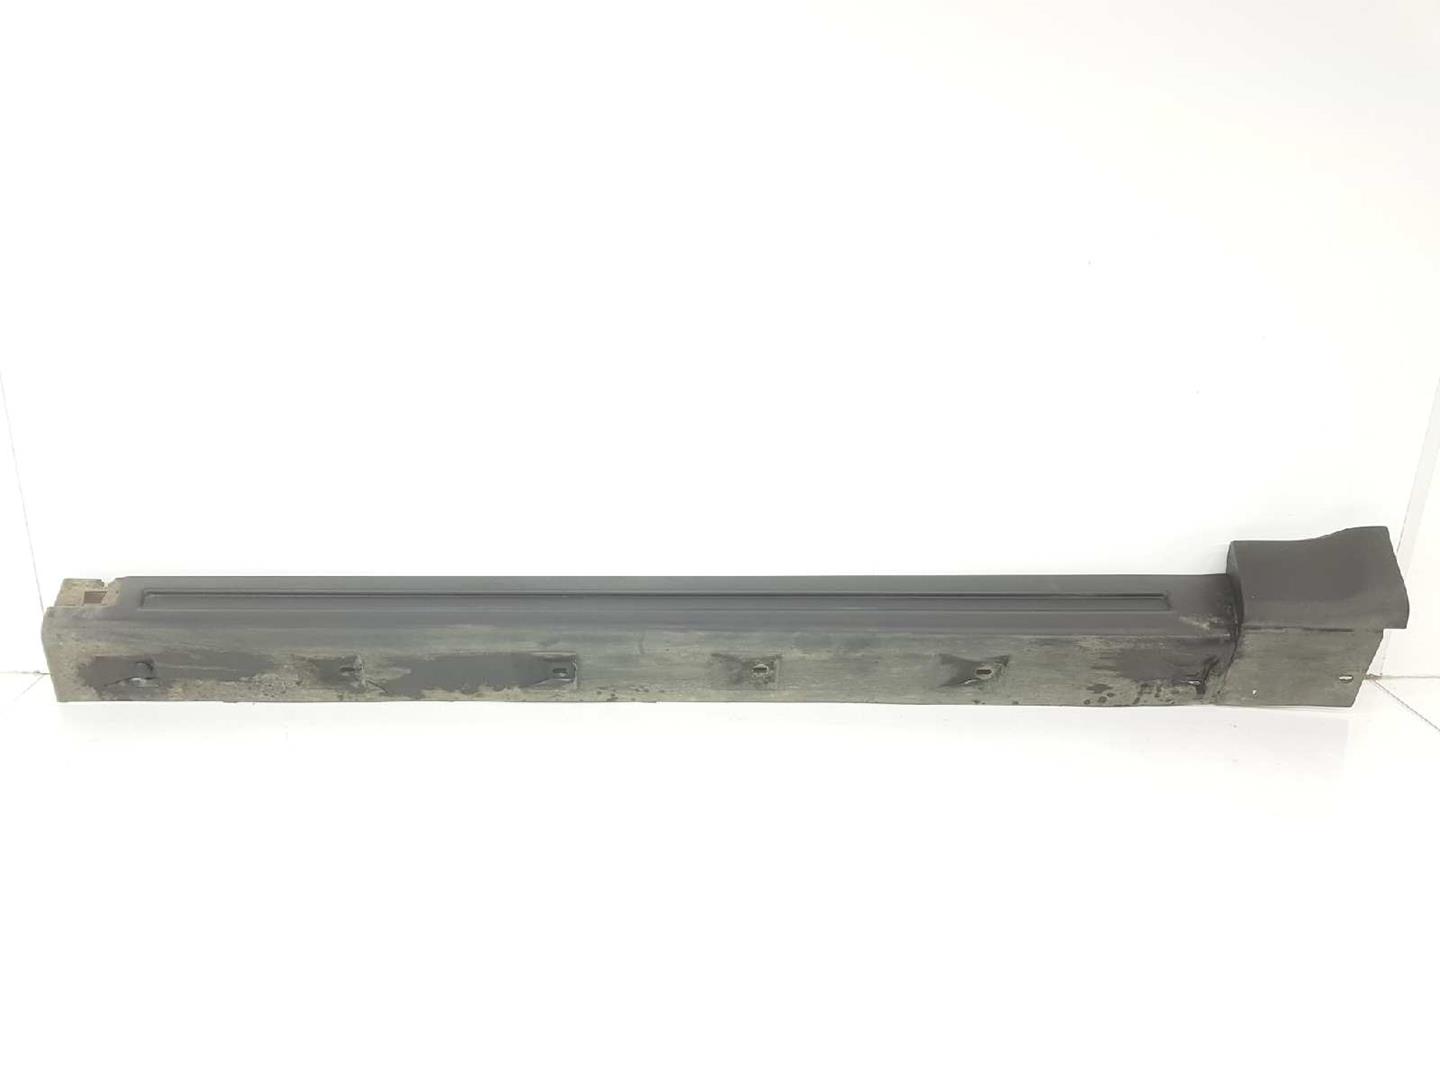 LAND ROVER Range Rover Sport 1 generation (2005-2013) Right Side Sideskirt LR018175, 5H32108B02EB8PCL, DGP500521PCL 19713121